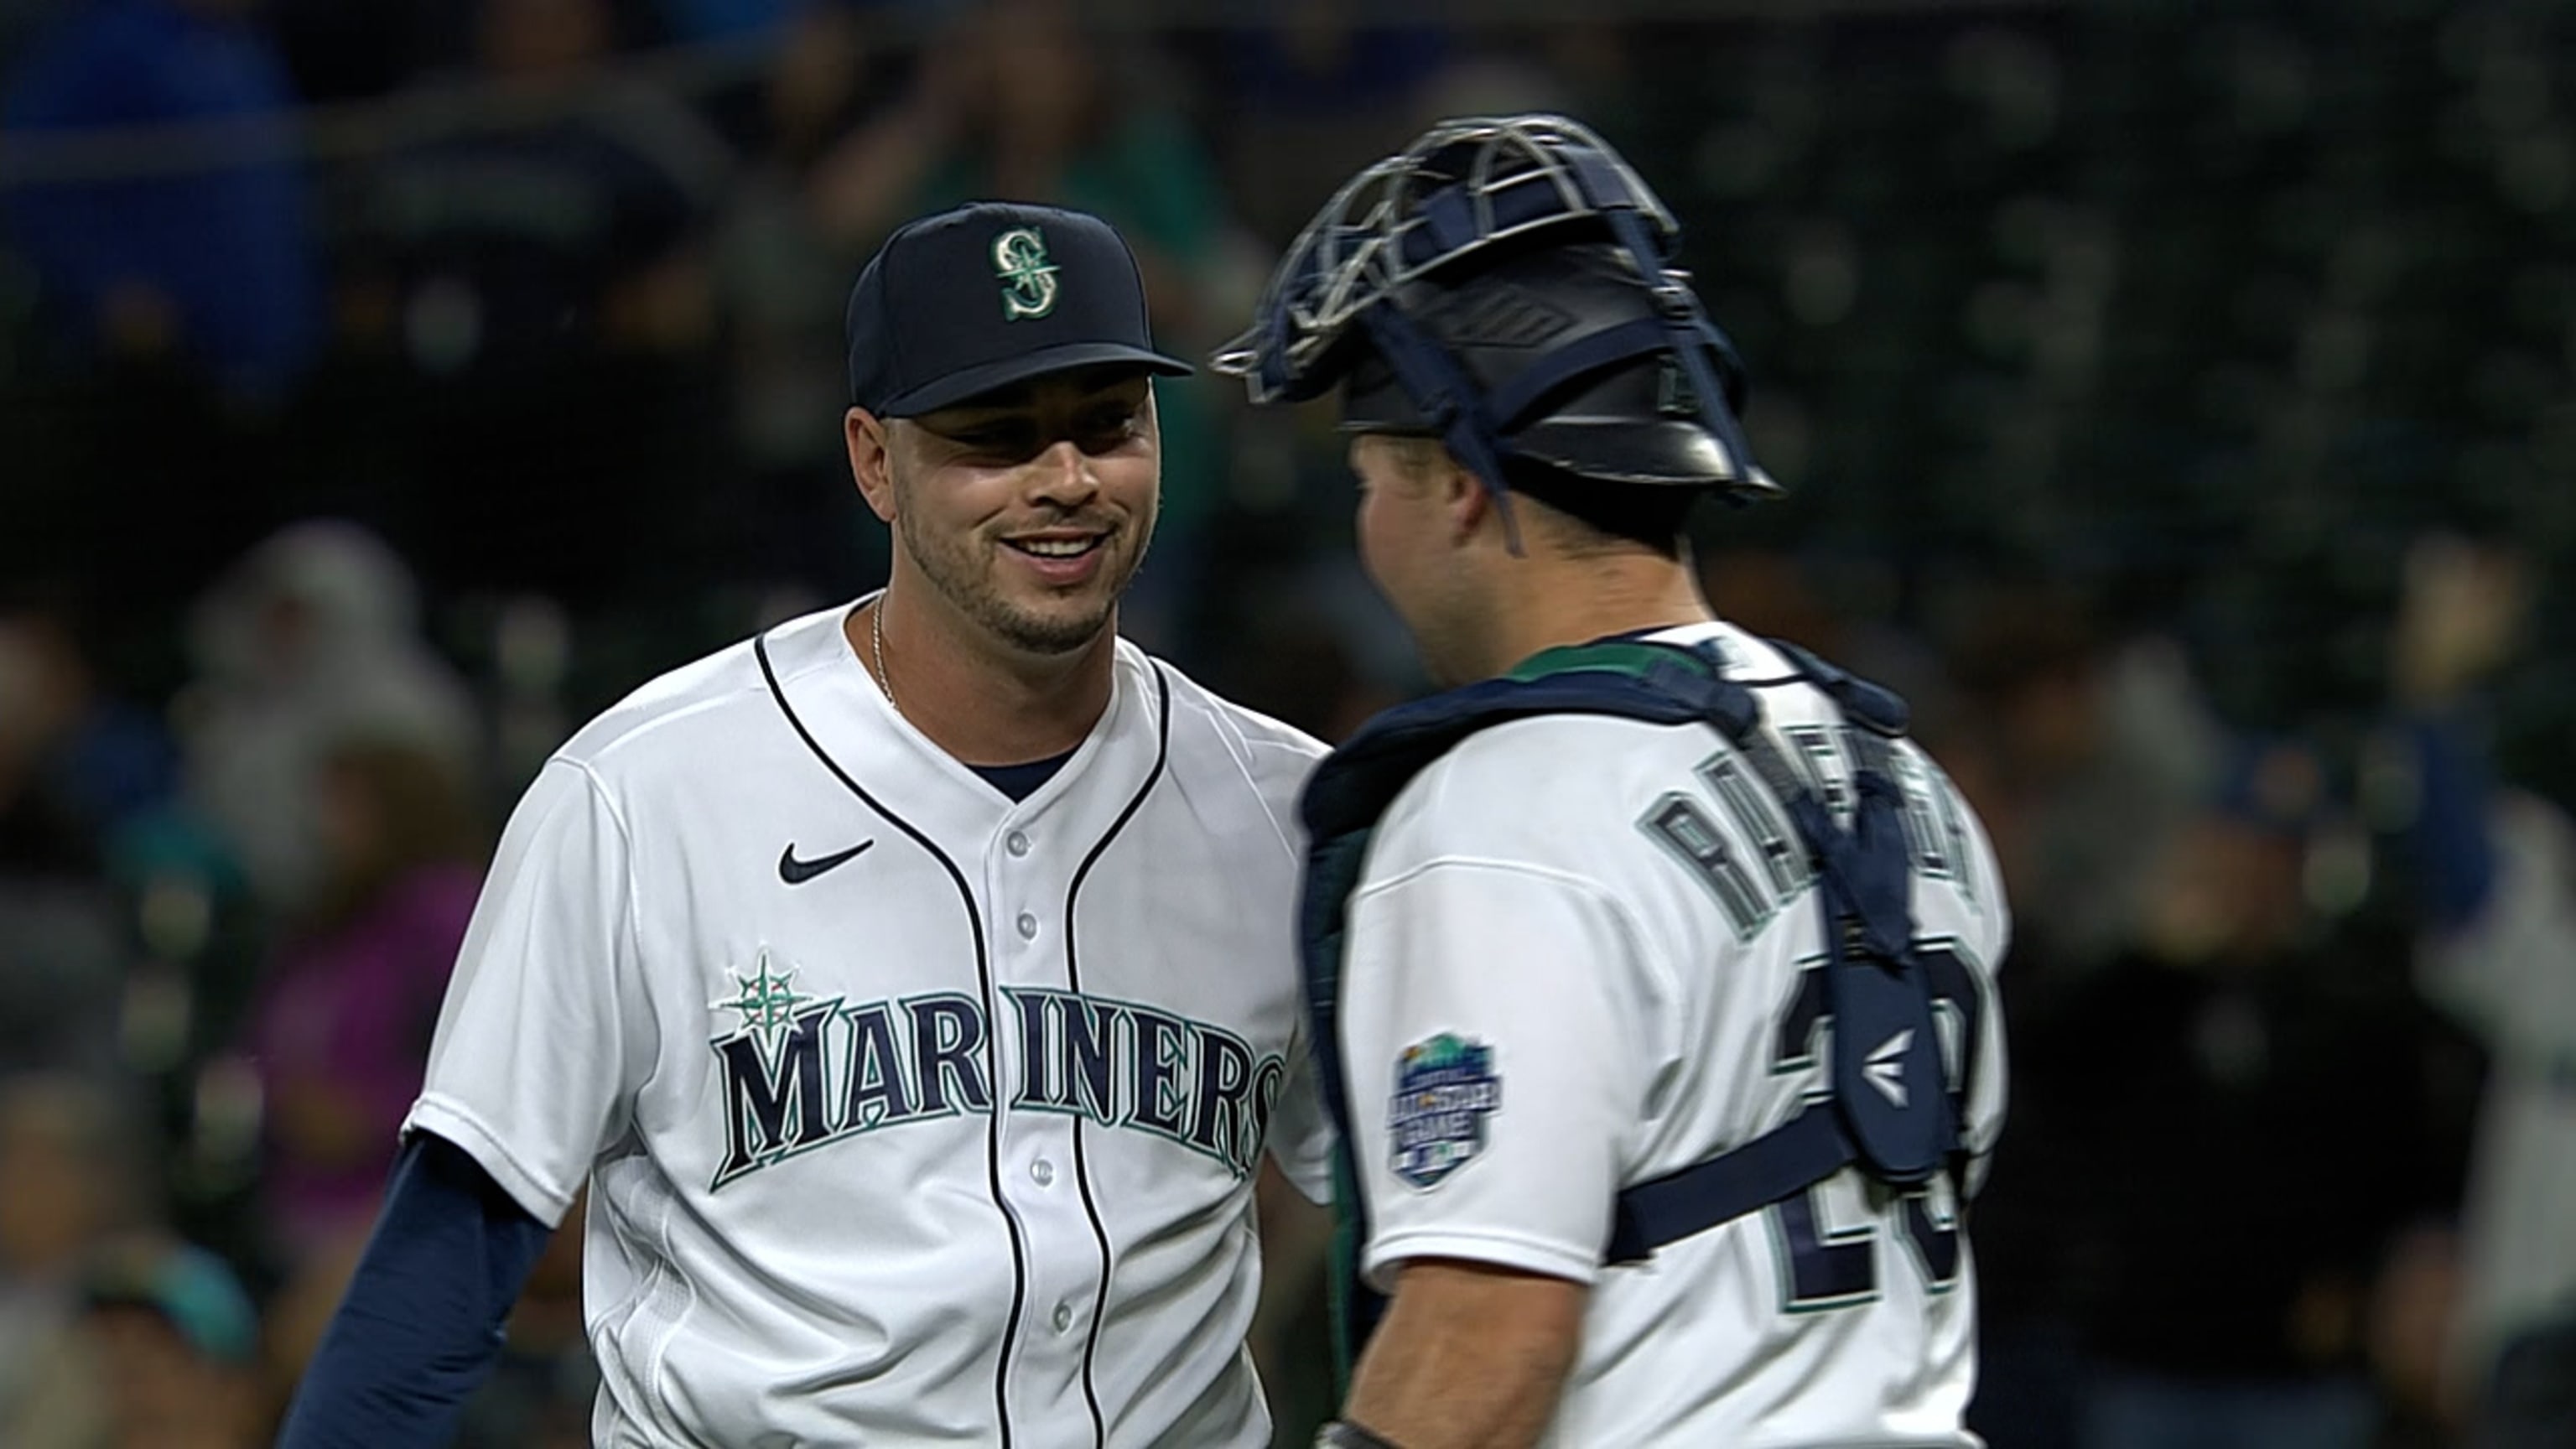 In today's game against the Brewers, the Seattle Mariners broke out th